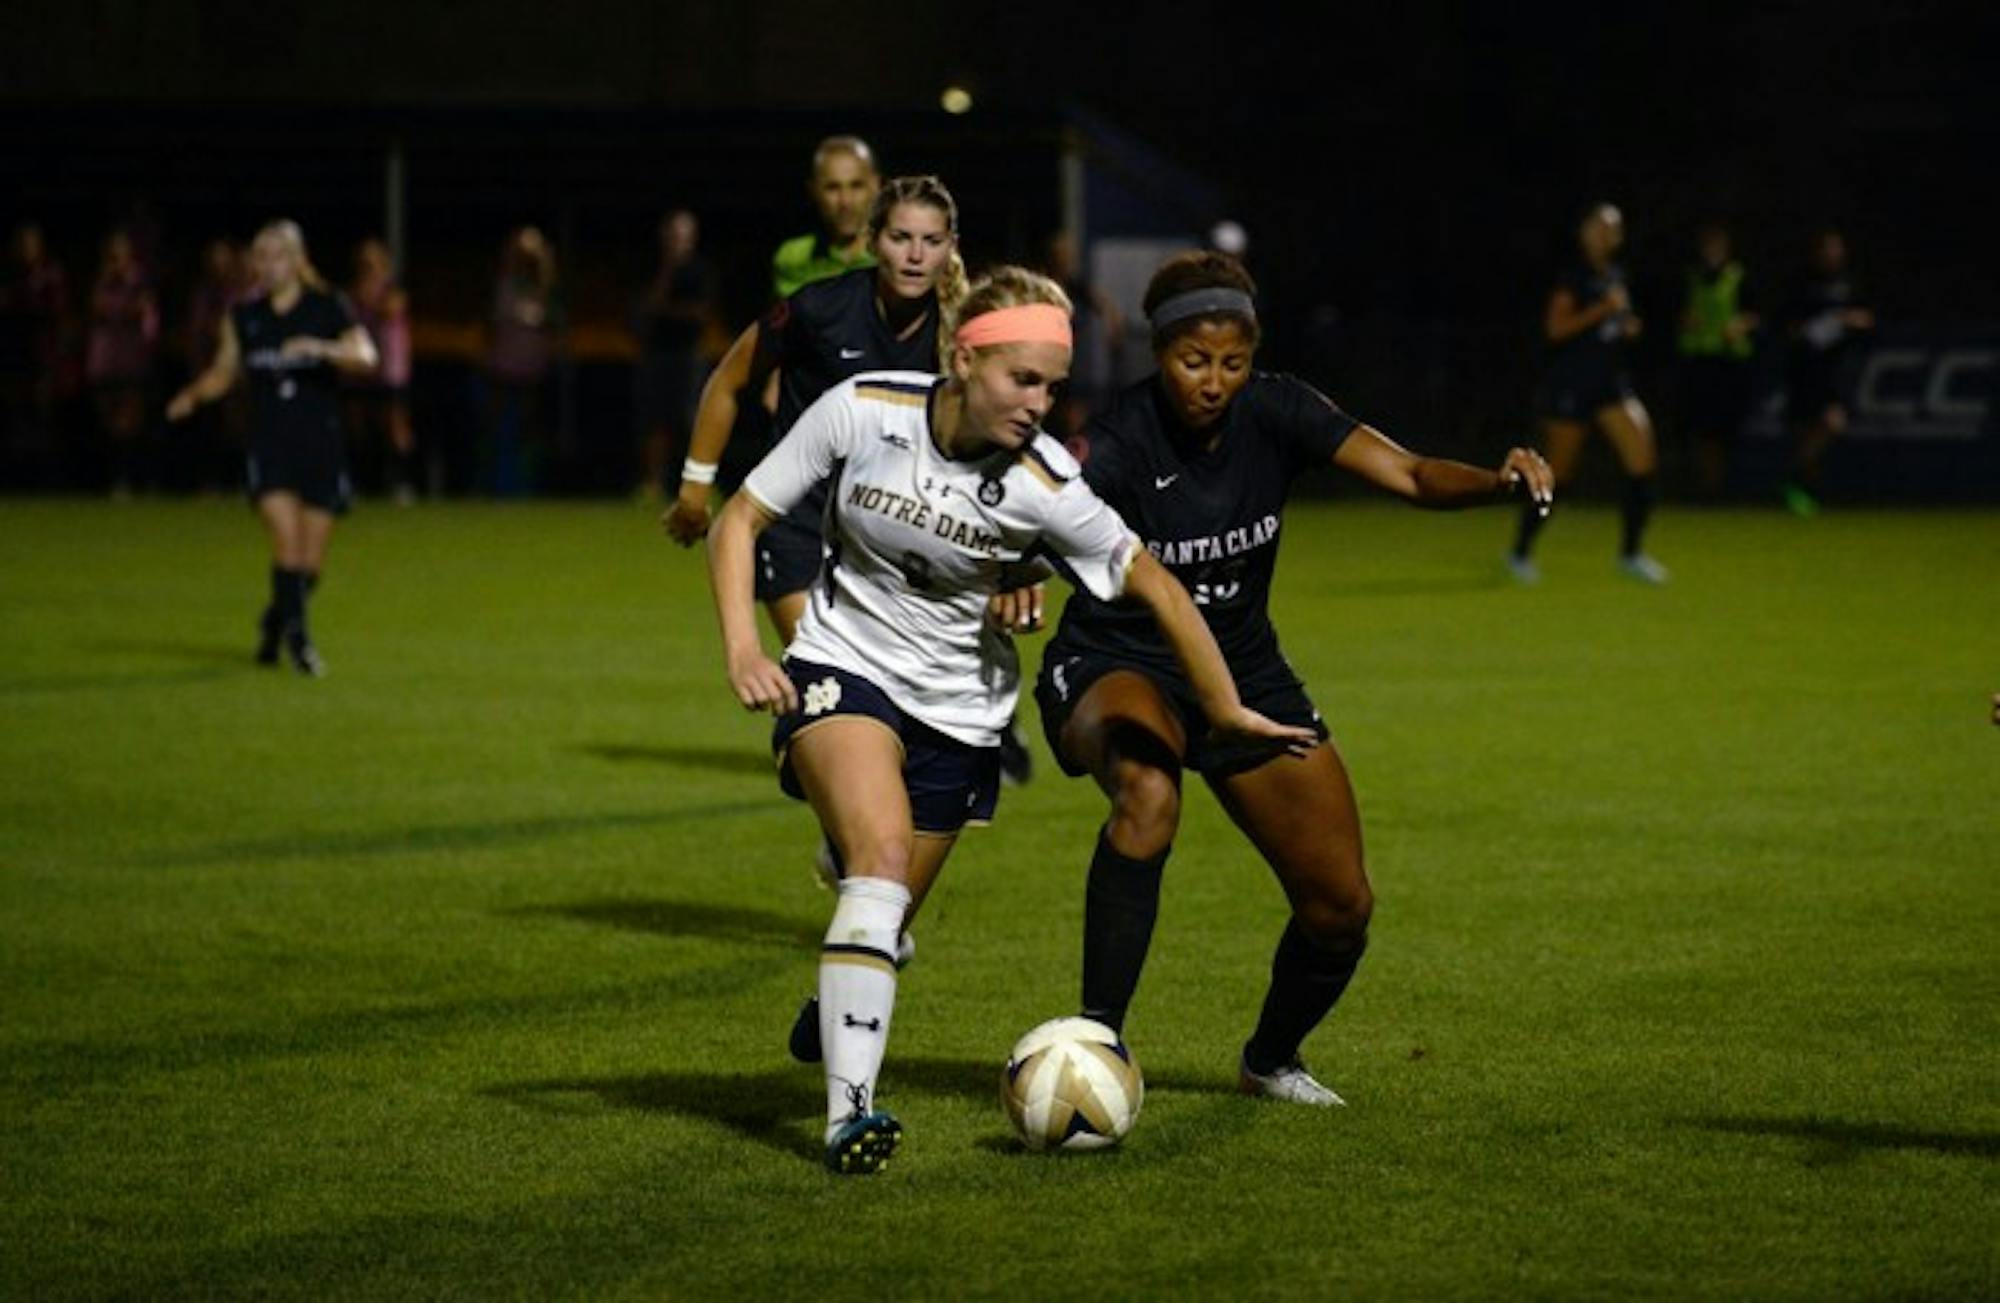 Irish freshman forward Natalie Jacobs dribbles past a defender during Notre Dame’s 2-1 win over Santa Clara on Aug. 28.